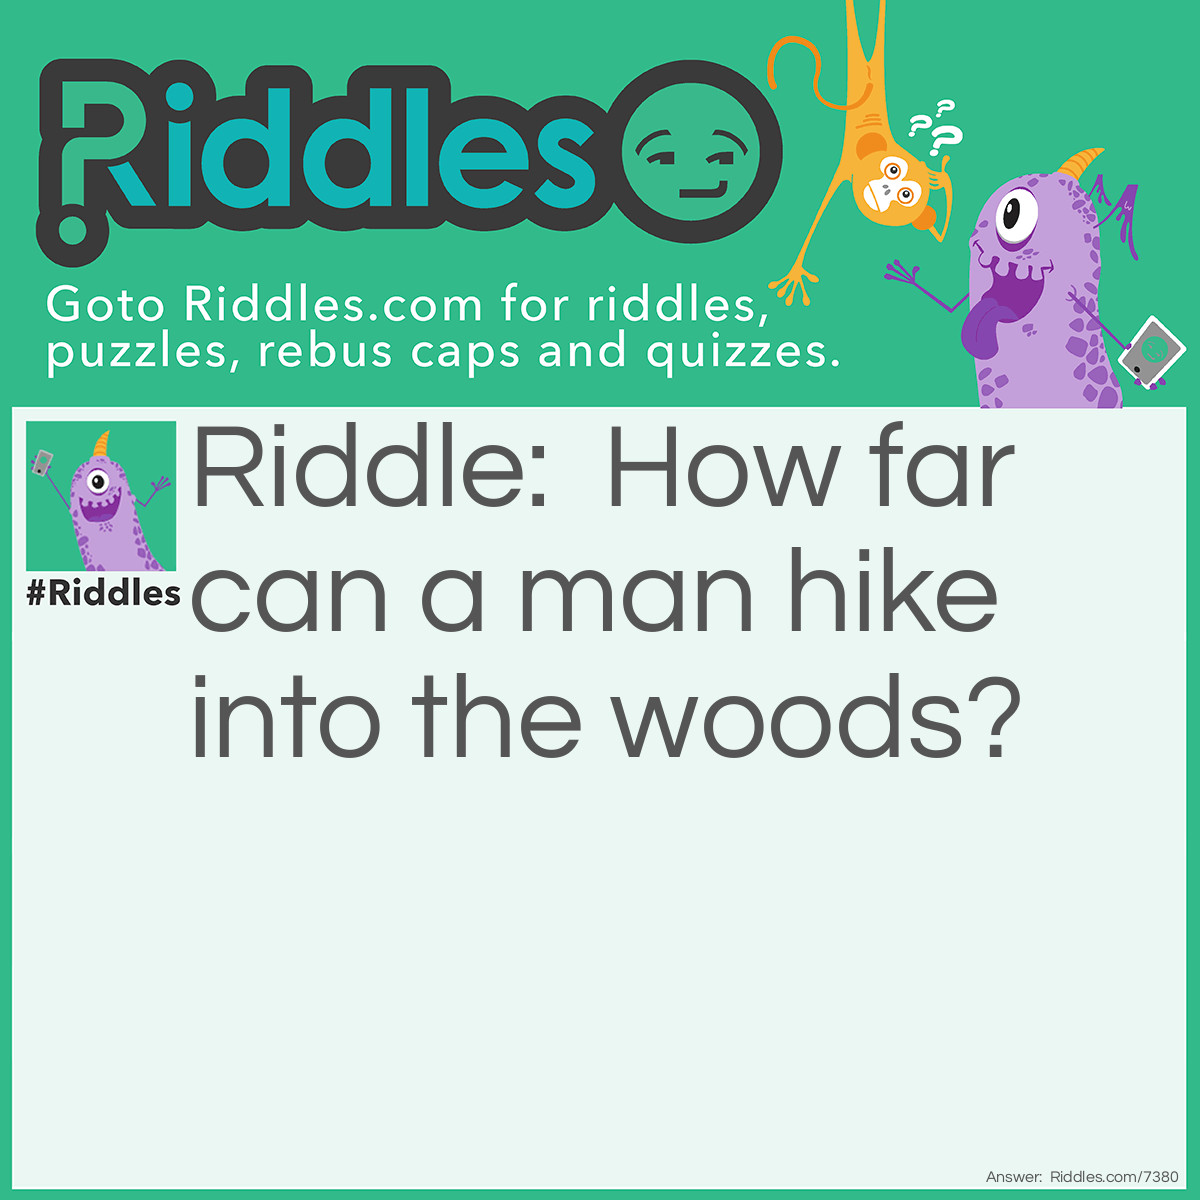 Riddle: How far can a man hike into the woods? Answer: Halfway. Then after that, he would be walking out of the woods.